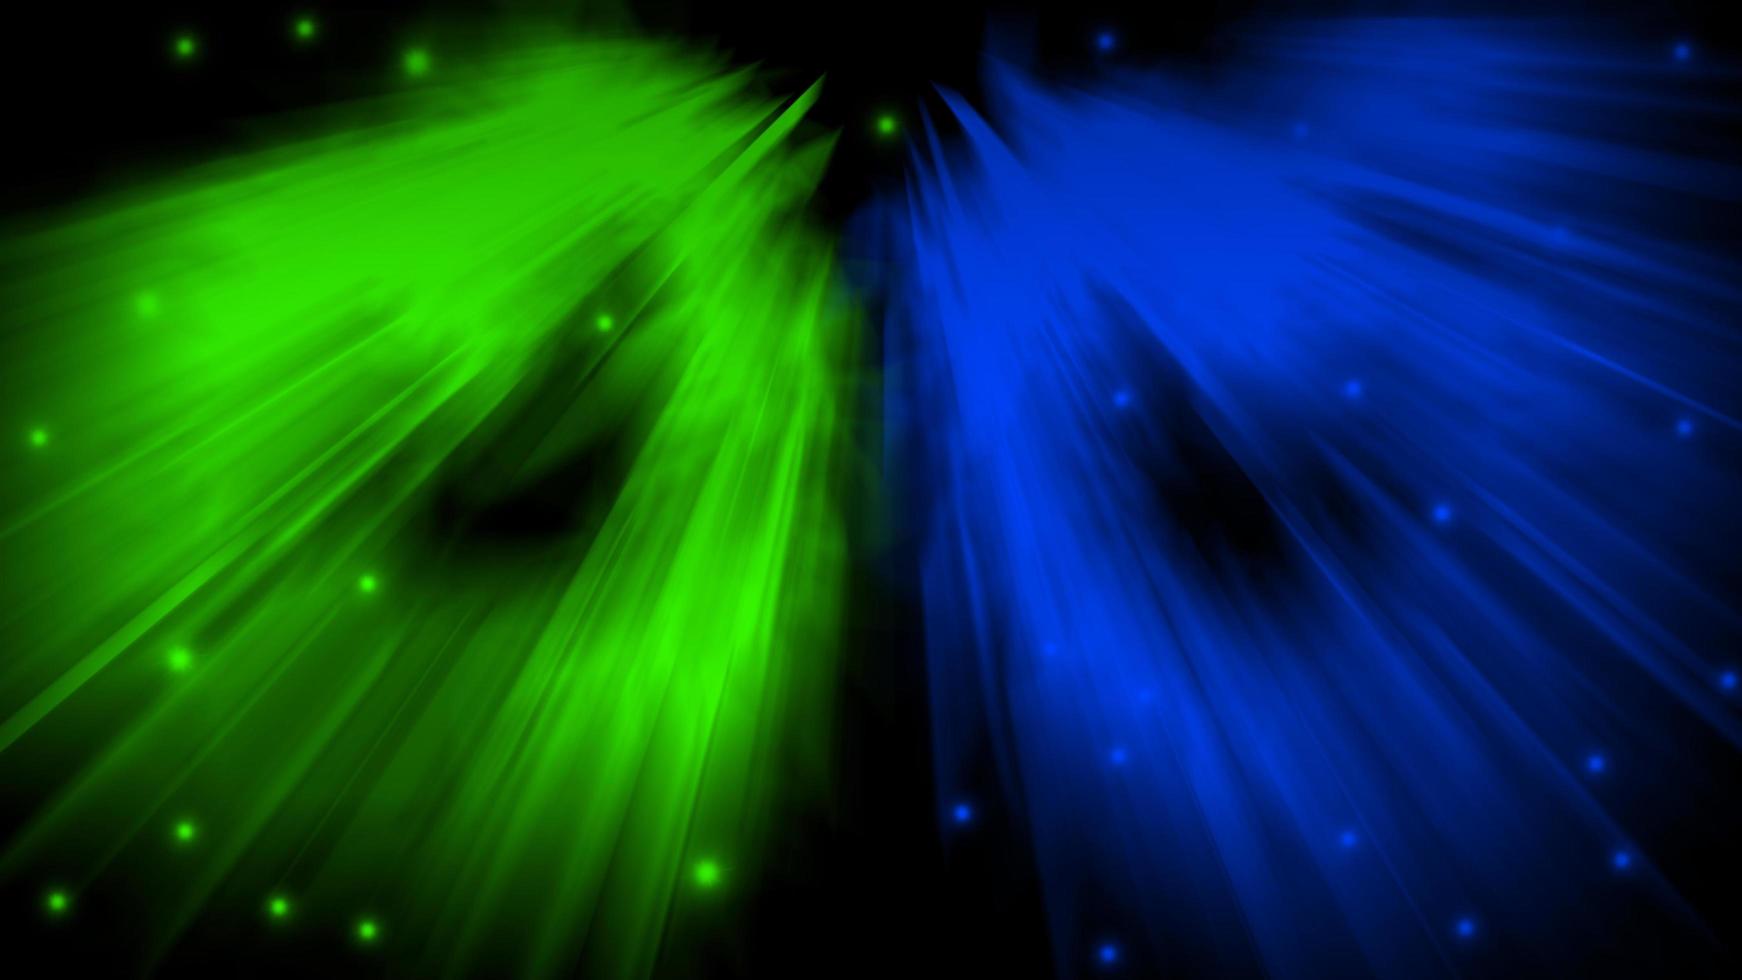 light speed movement pattern design background concept in green and blue color on the black background photo